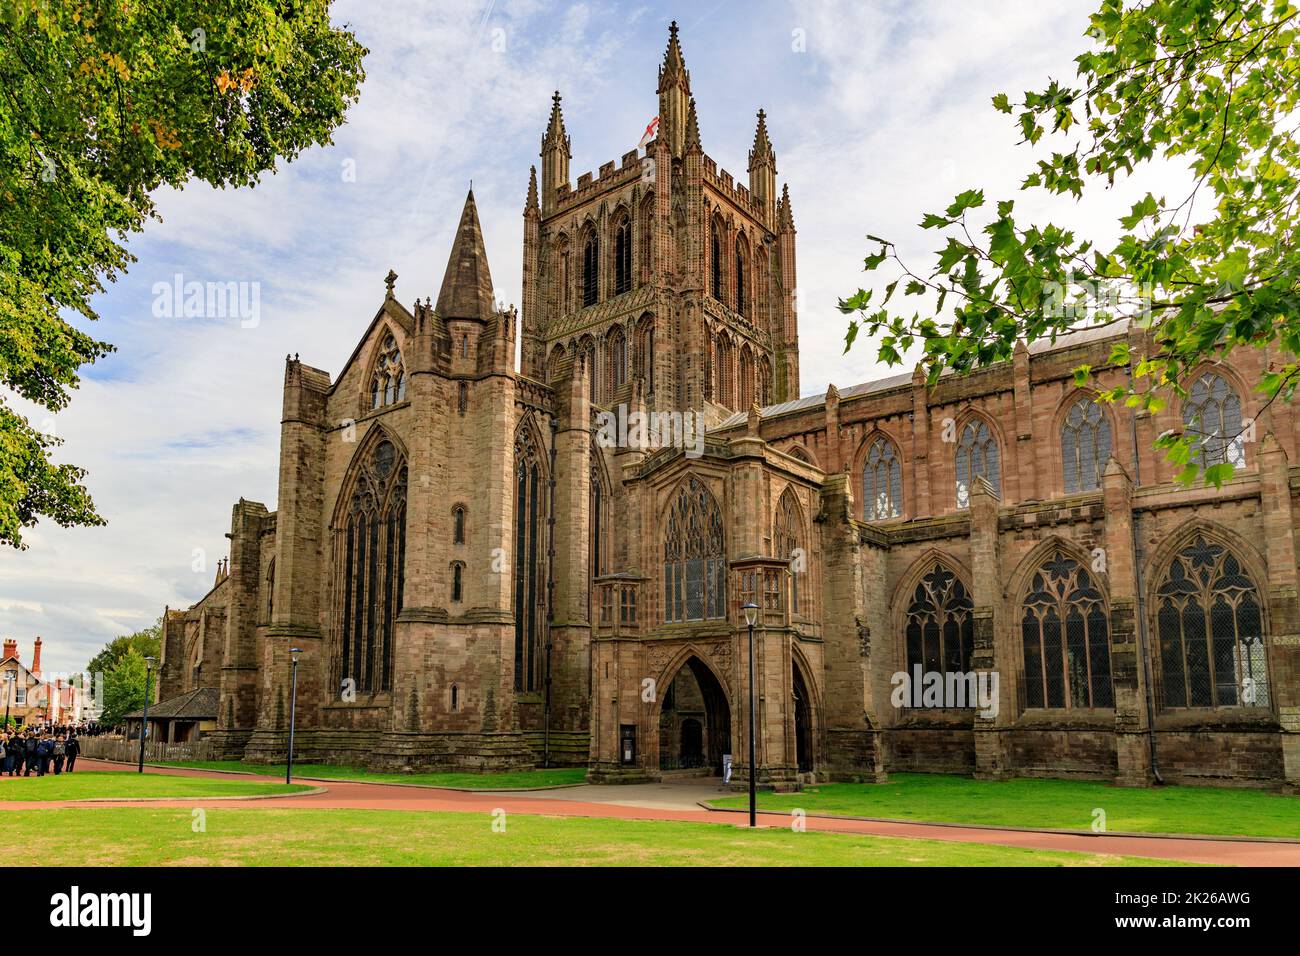 The Gothic Cathedral of St Mary the Virgin and St Ethelbert the King in Hereford, Herefordshire, England, UK Stock Photo